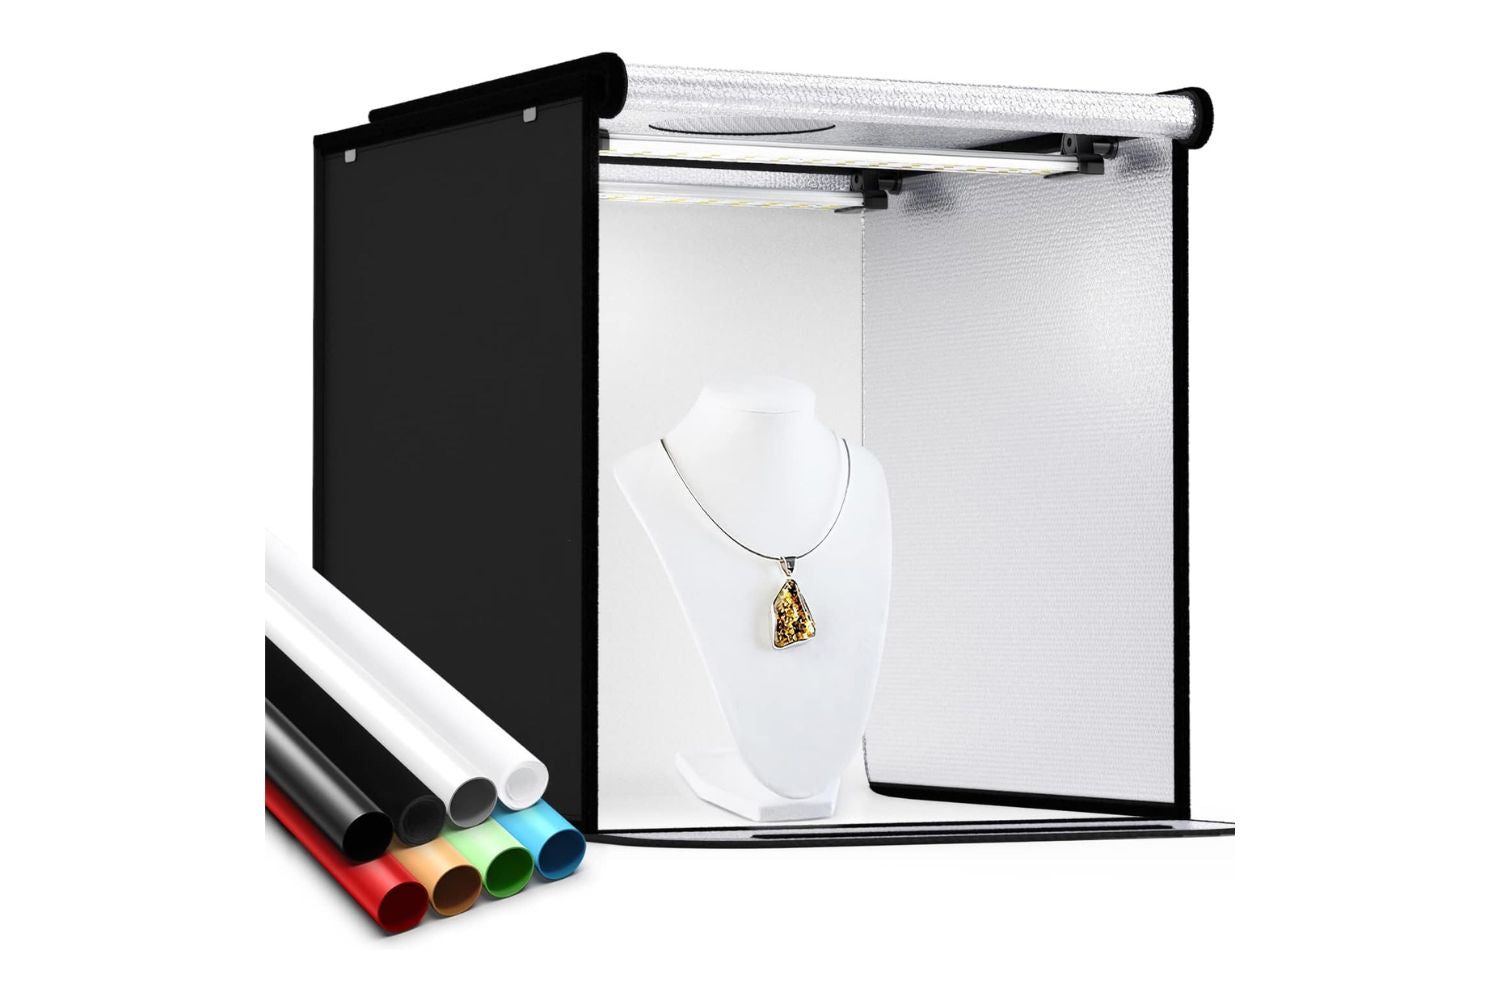 Portable Light Box For Product Photography